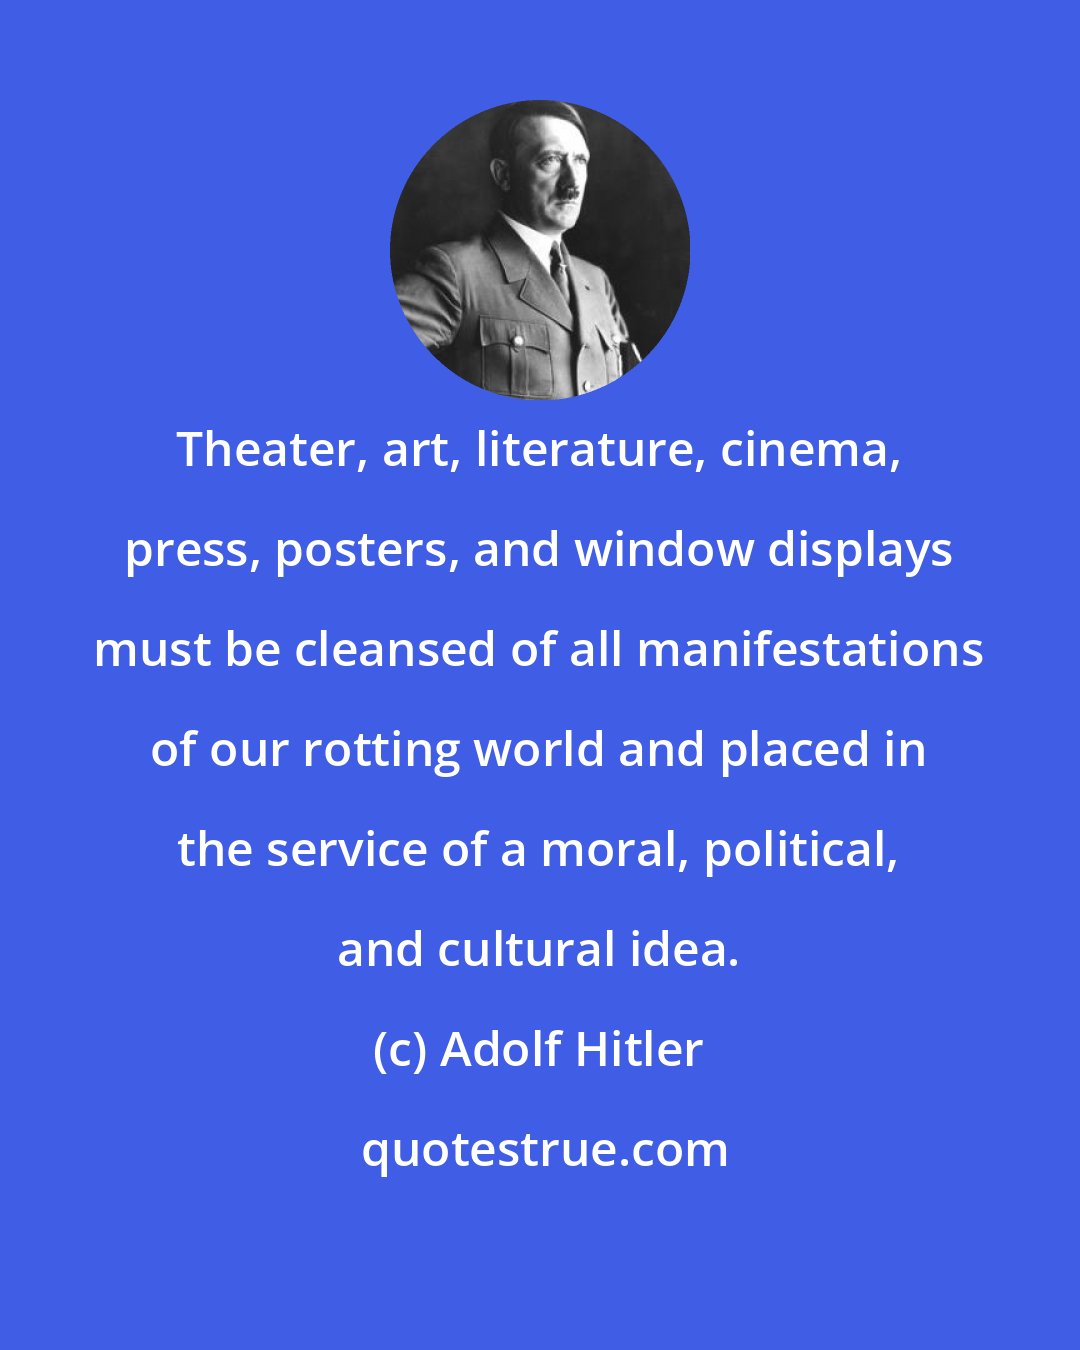 Adolf Hitler: Theater, art, literature, cinema, press, posters, and window displays must be cleansed of all manifestations of our rotting world and placed in the service of a moral, political, and cultural idea.